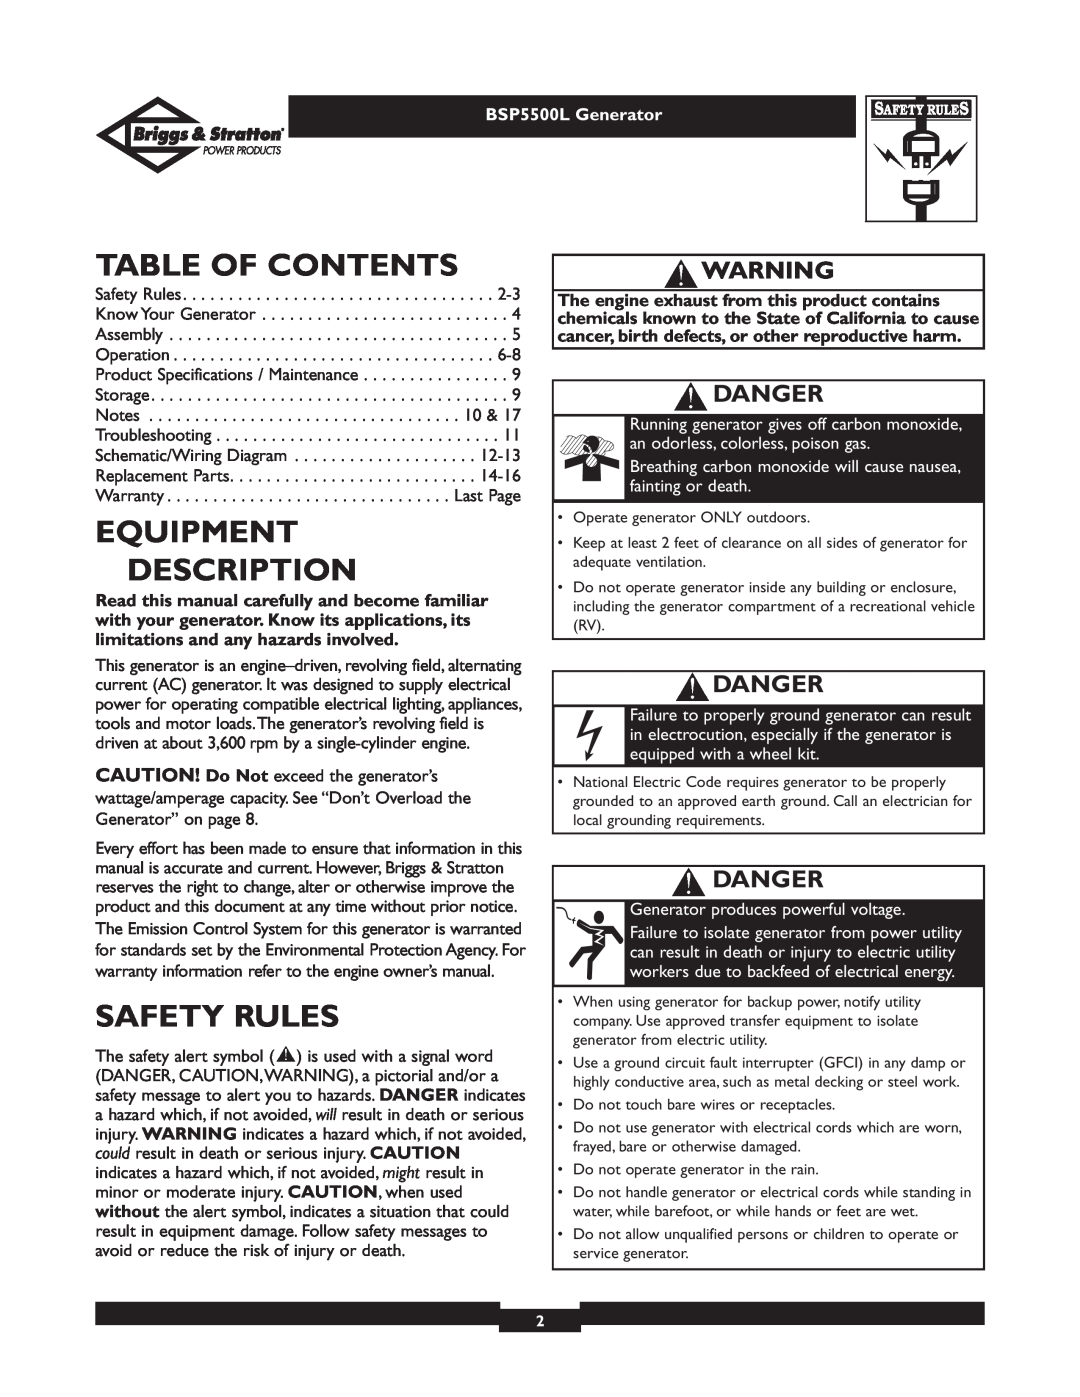 Briggs & Stratton bsp5500l owner manual Table Of Contents, Equipment Description, Safety Rules, Danger, BSP5500L Generator 